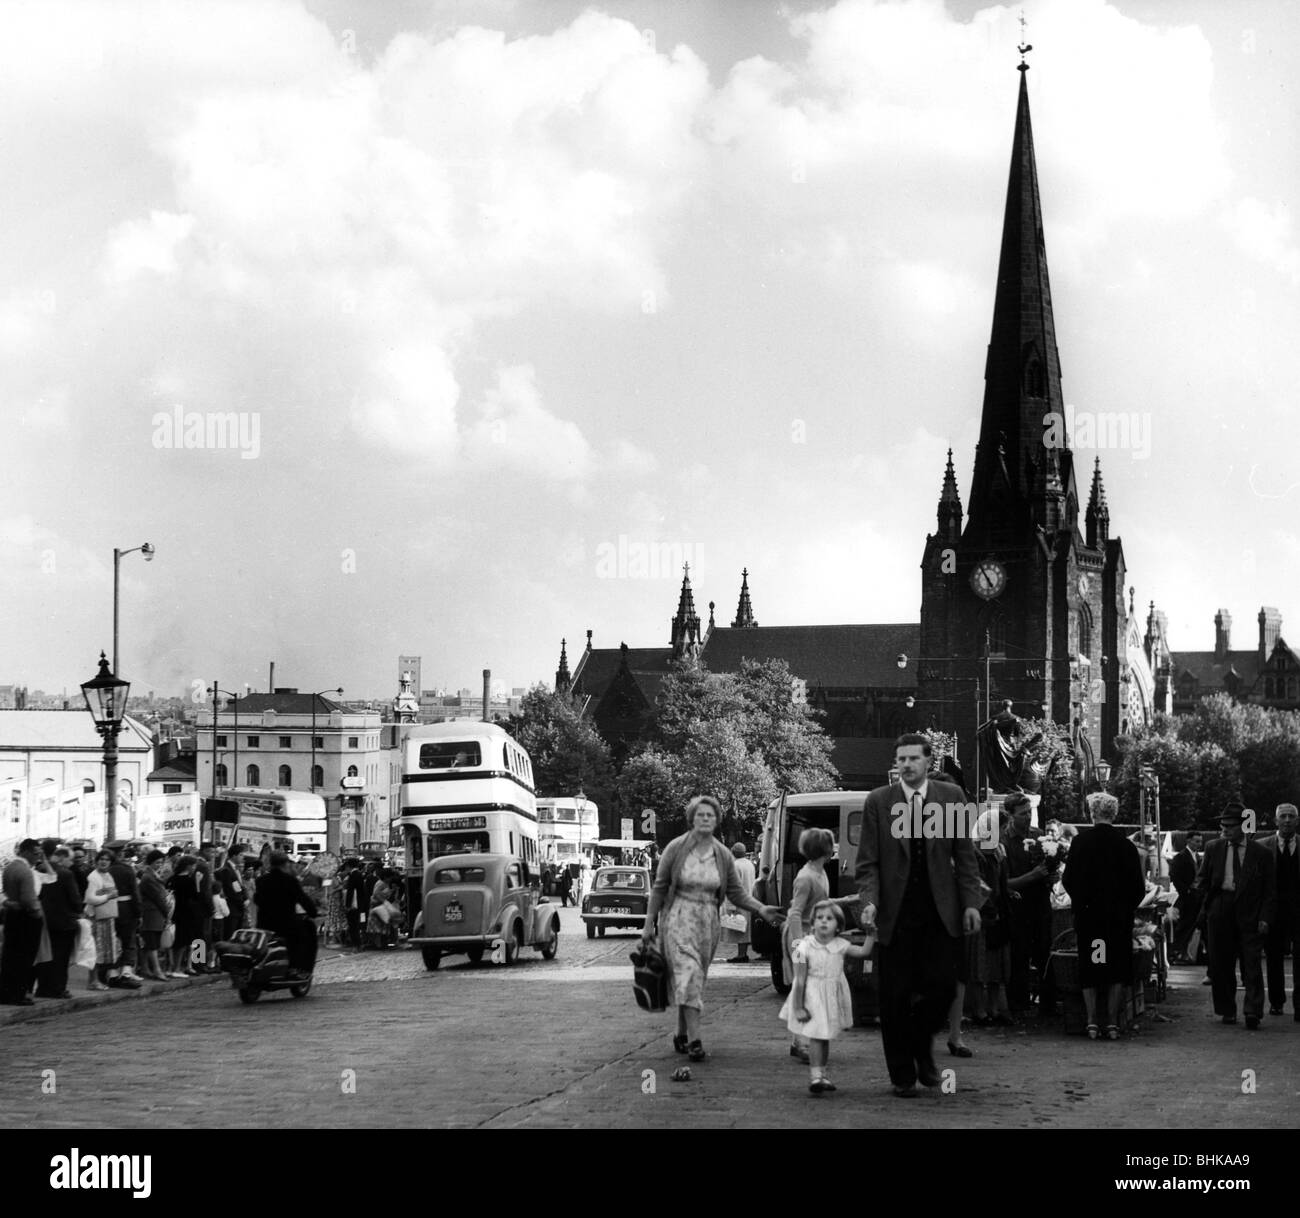 Birmingham bull ring 1960s High Resolution Stock Photography and Images